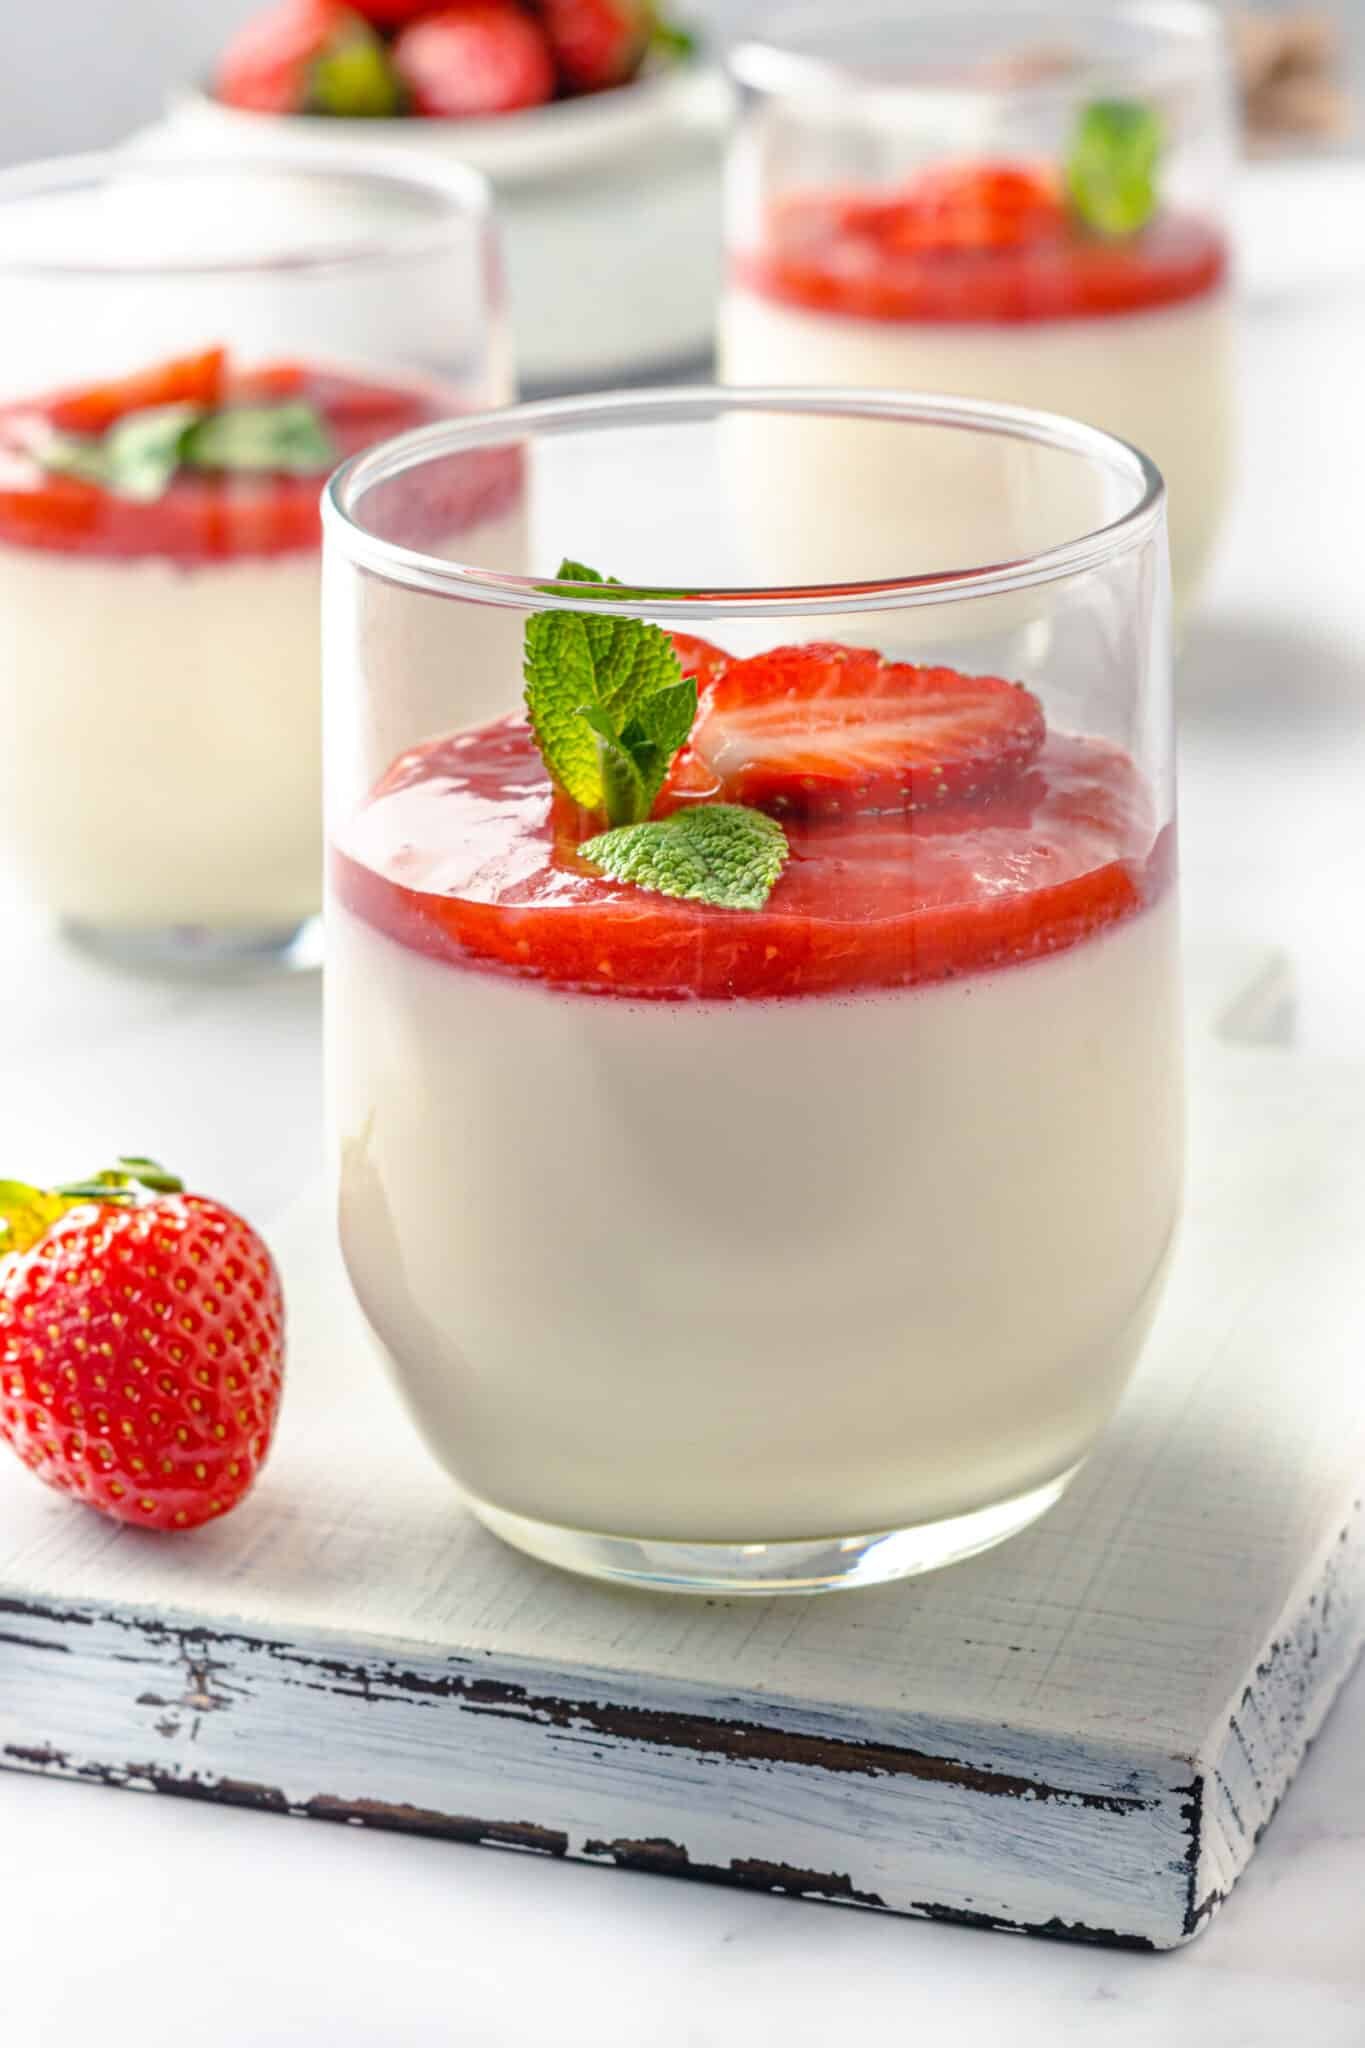 panna cotta in a glass with strawberry jam on top and sprigs of mint leaves and slices fresh strawberries for garnish.